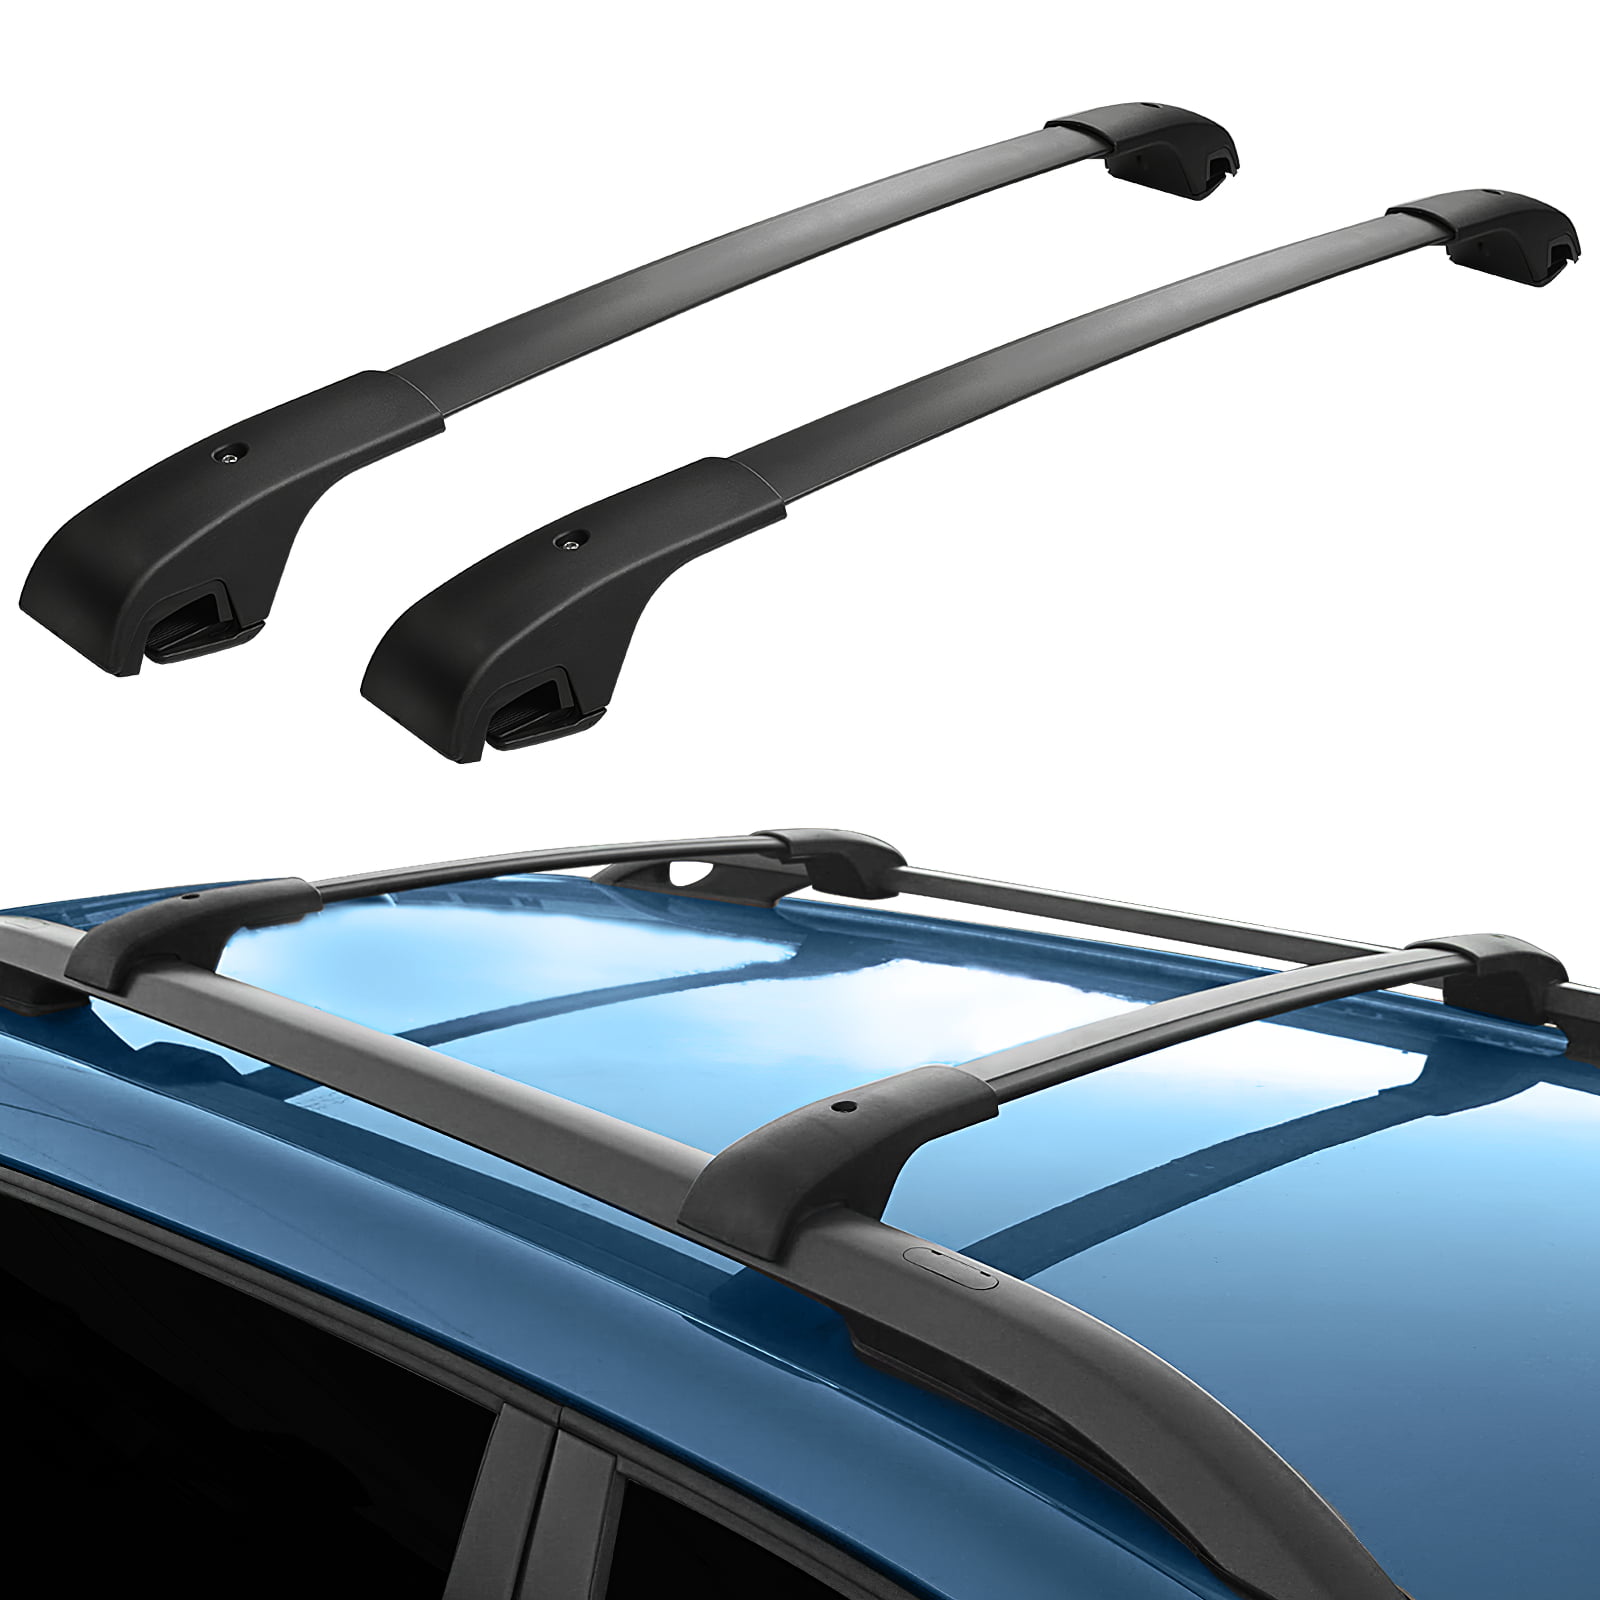 Roof Rack Cross Bars for 2014-2021 Jeep Cherokee Aluminum Luggage Carrier Replacement - Walmart 2014 Jeep Cherokee Roof Rack Cross Bars